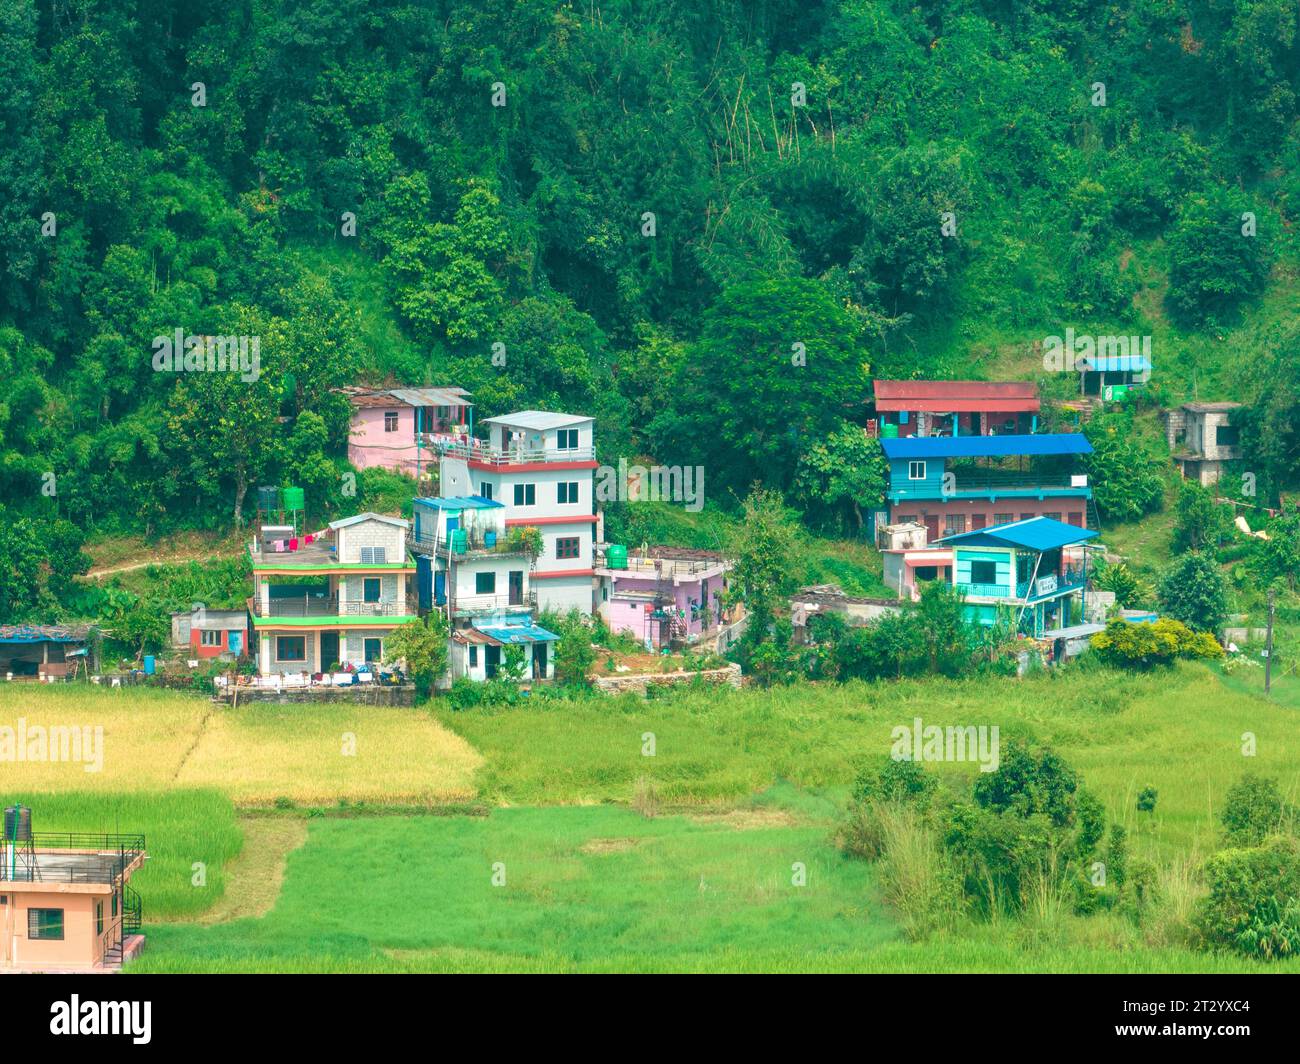 Aerial view of a nepalese rural landscape near Lake Bagnes, rice fields and houses, agricultural work. Lekhnath, Pokhara. Nepal. 10-7-2023 Stock Photo